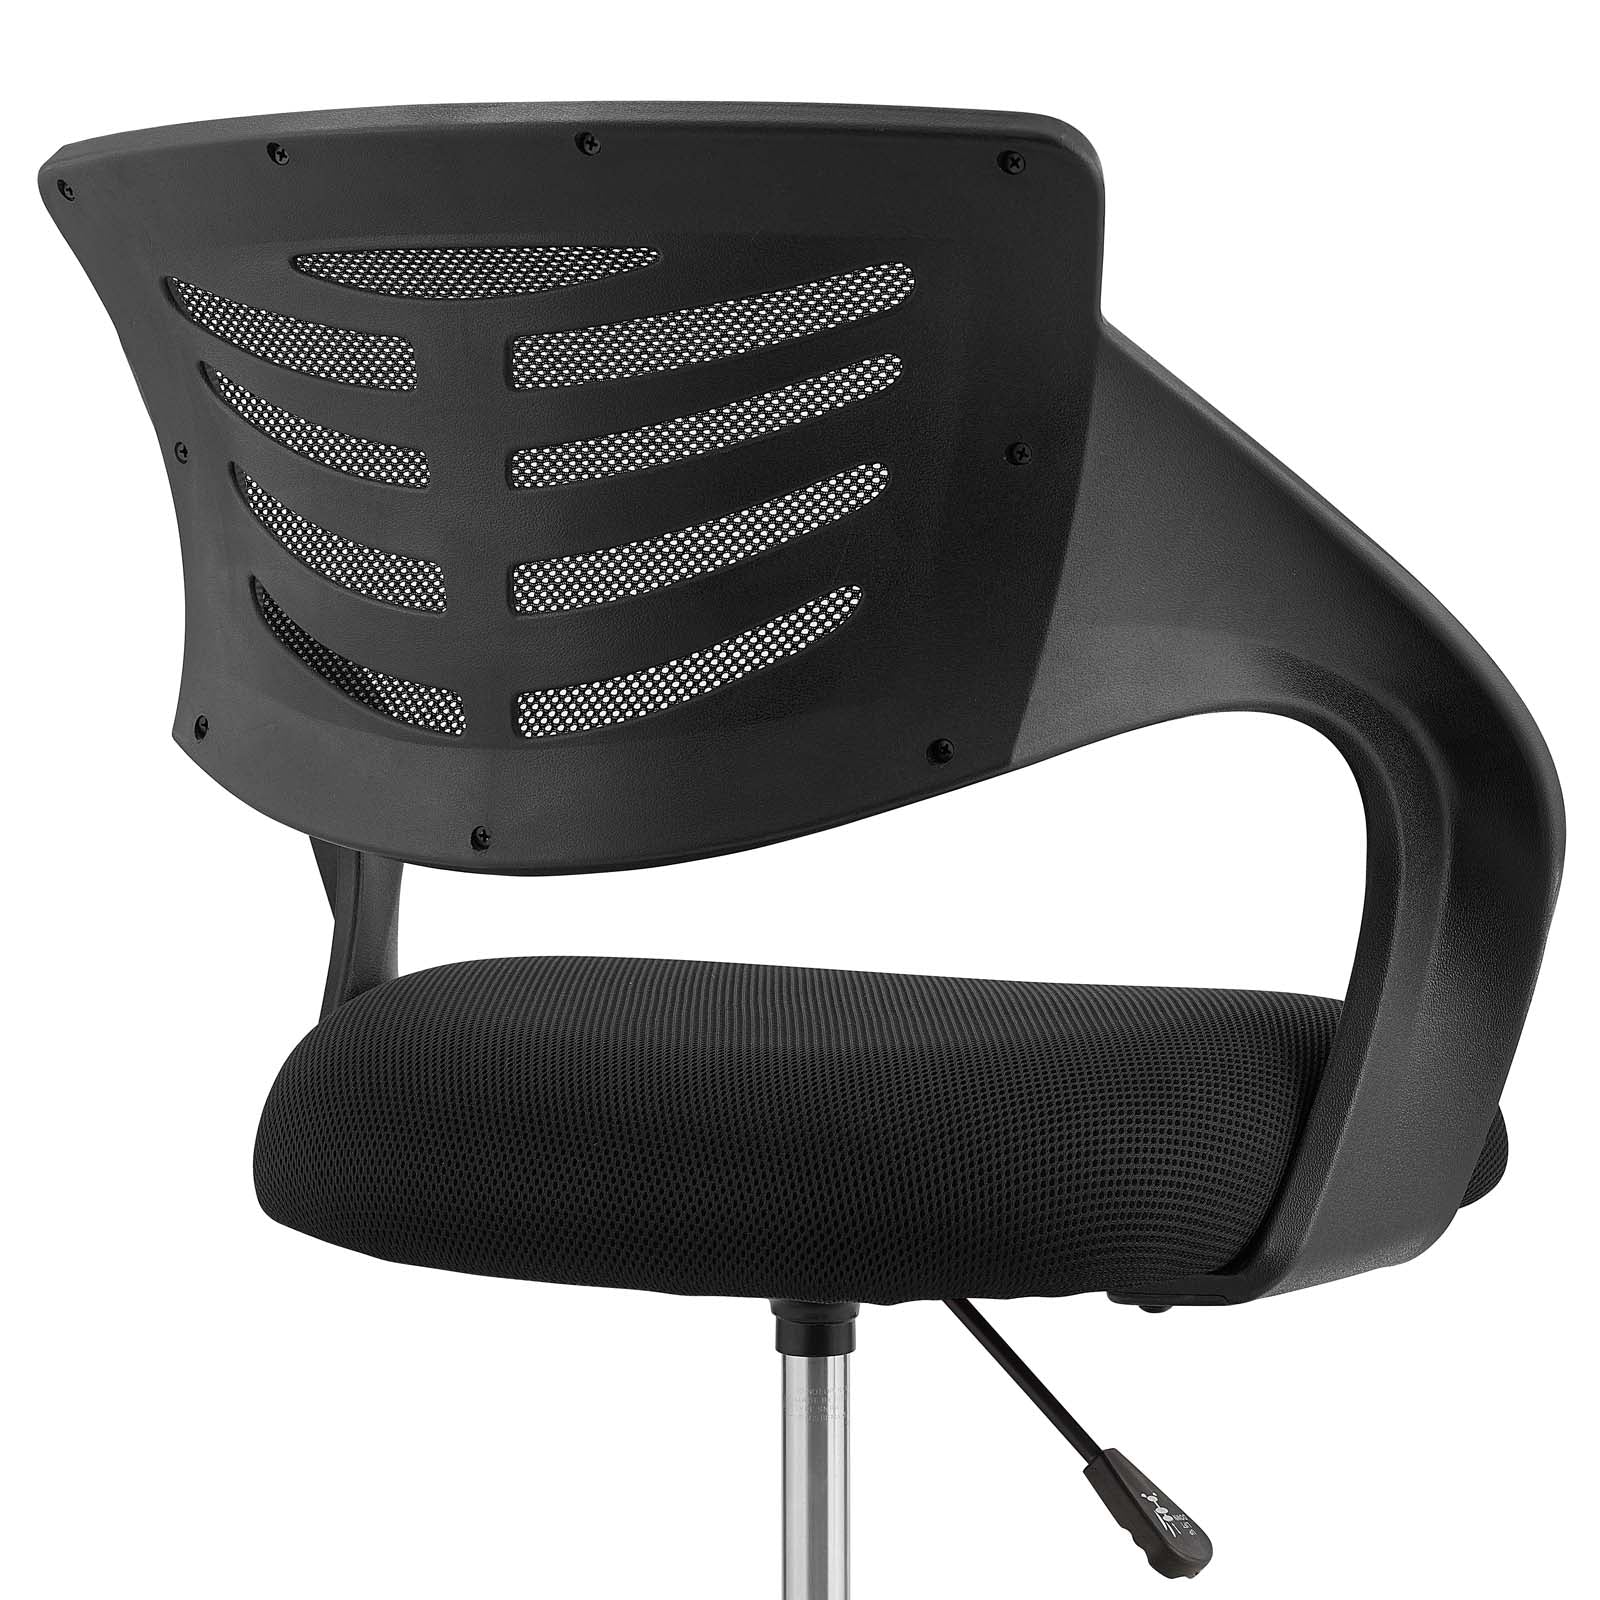 Modway Task Chairs - Thrive Mesh Drafting Chair Black